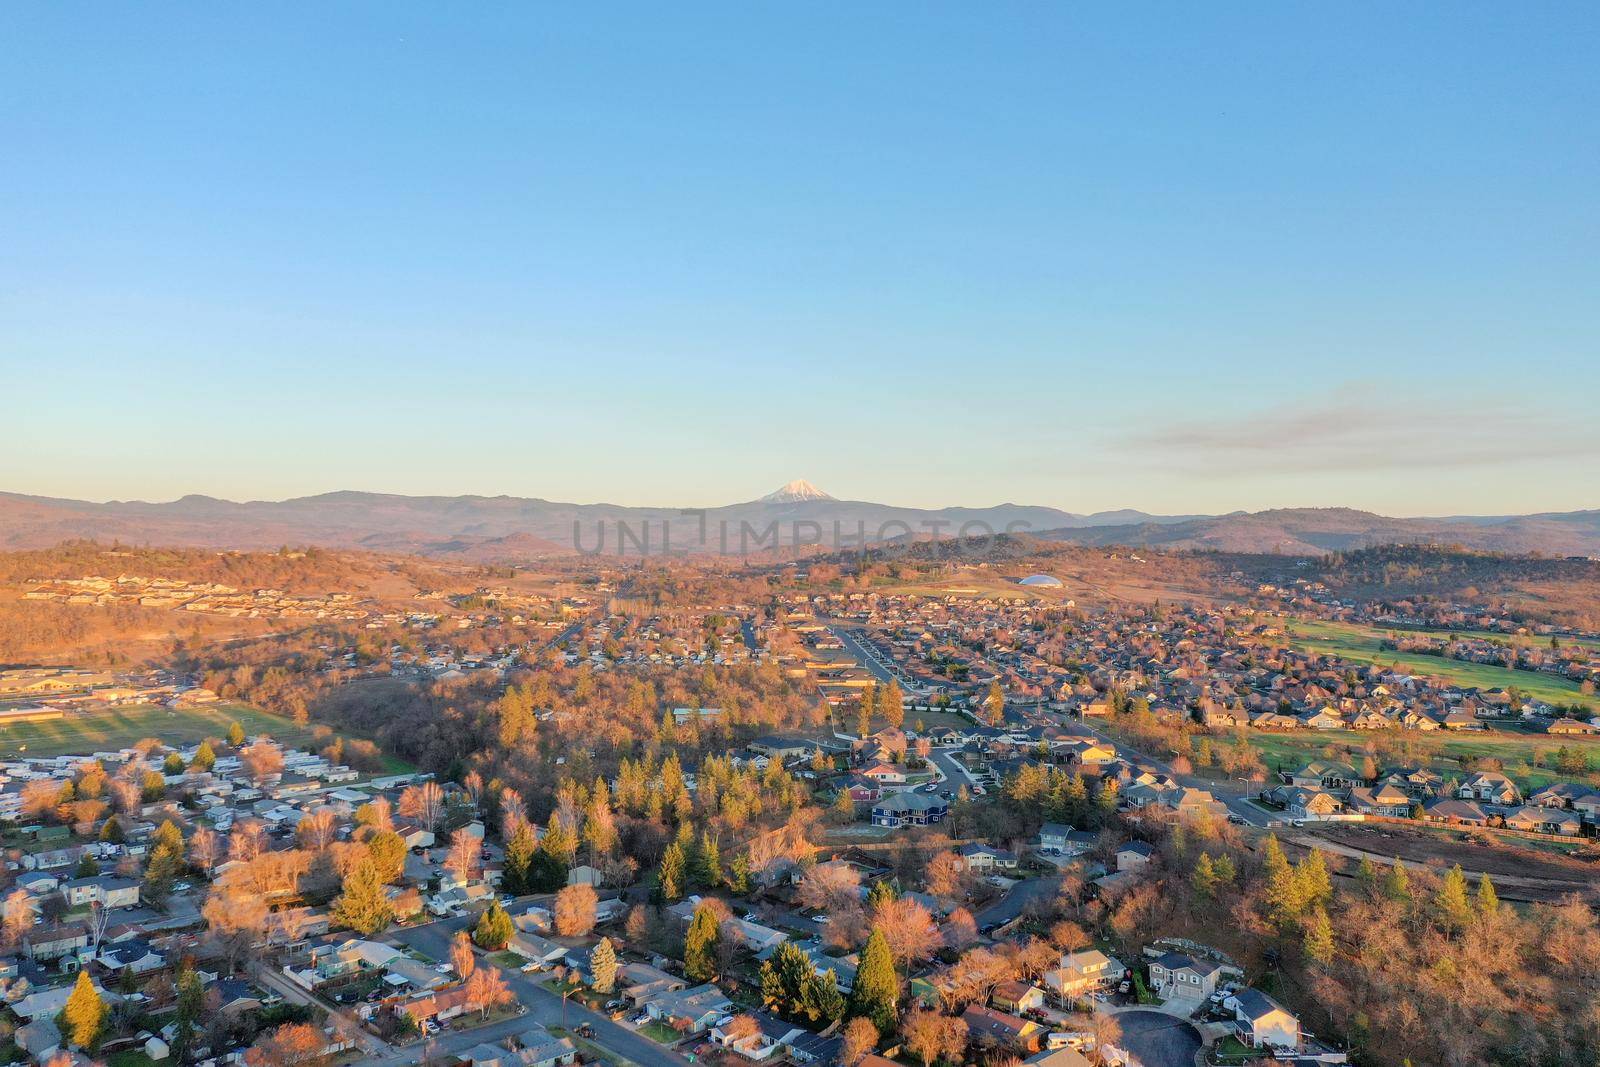 Peaceful town surrounded by trees with mountains as background during beautiful sunset. Aerial view of houses surrounded by autumn-colored nature. Rural town landscape